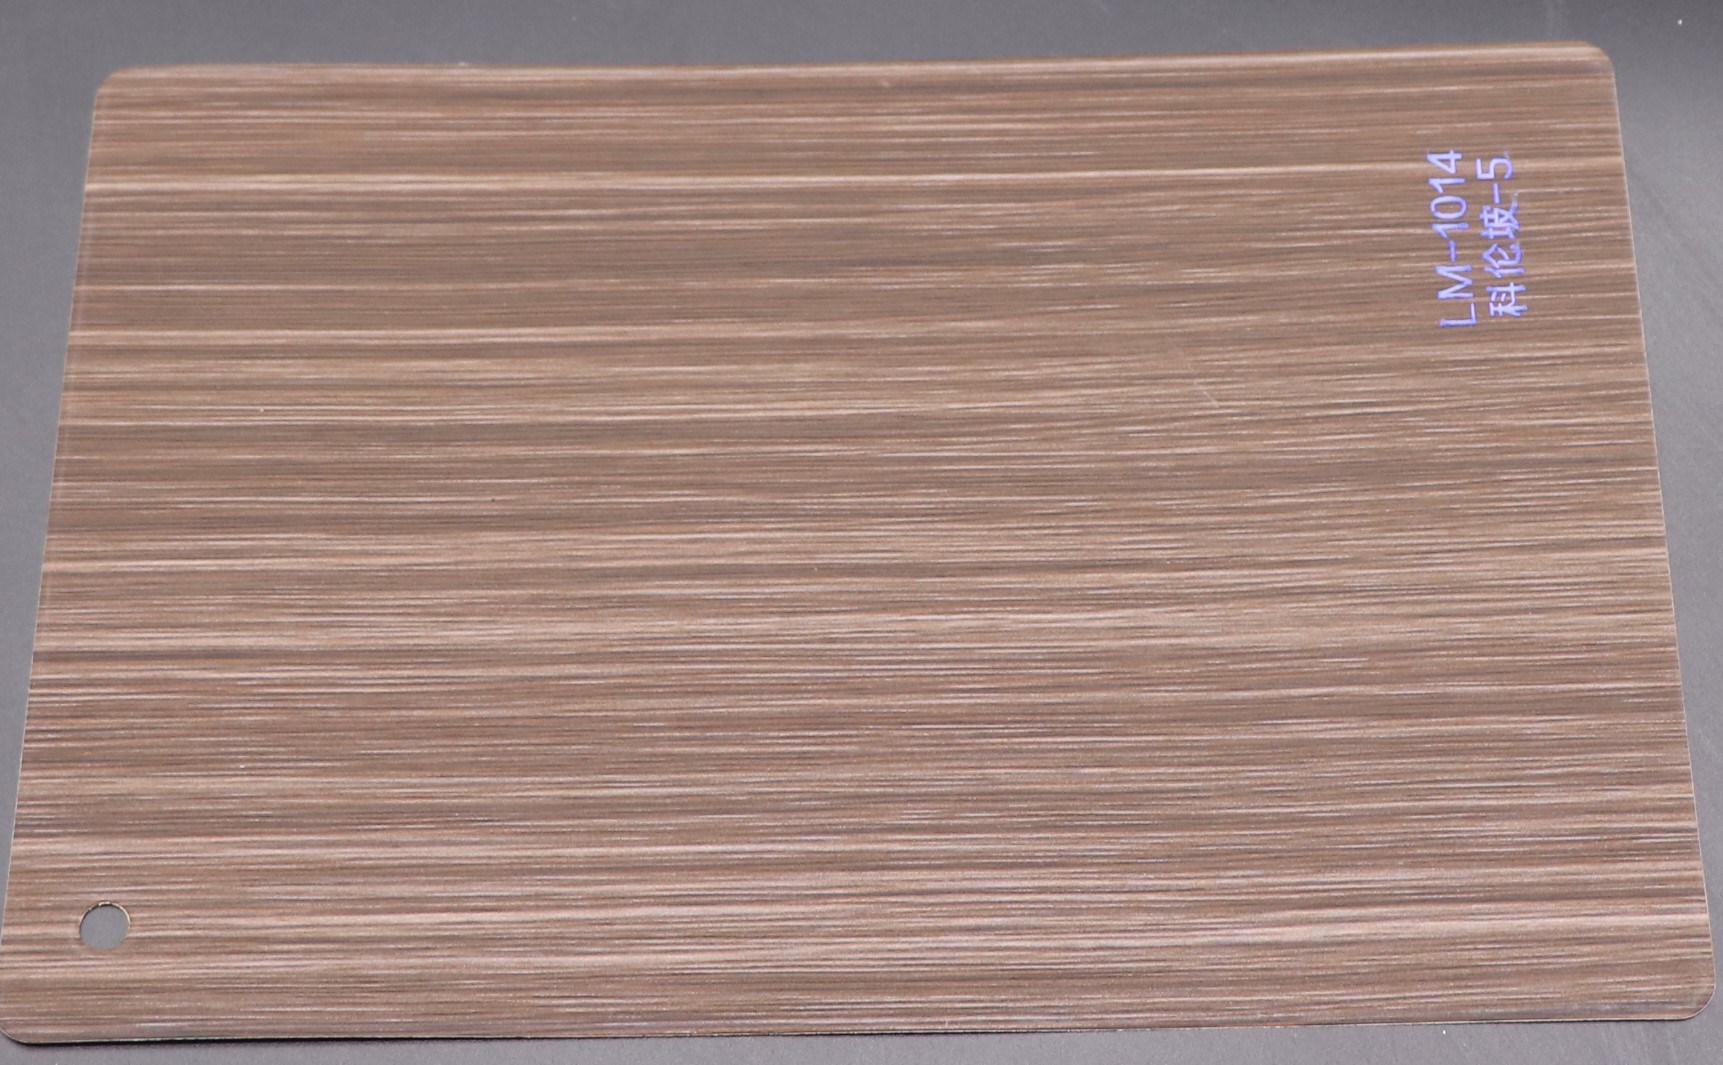 16si 30si 35si PVC Film for Door Cabinet Furniture Lamination Decoration